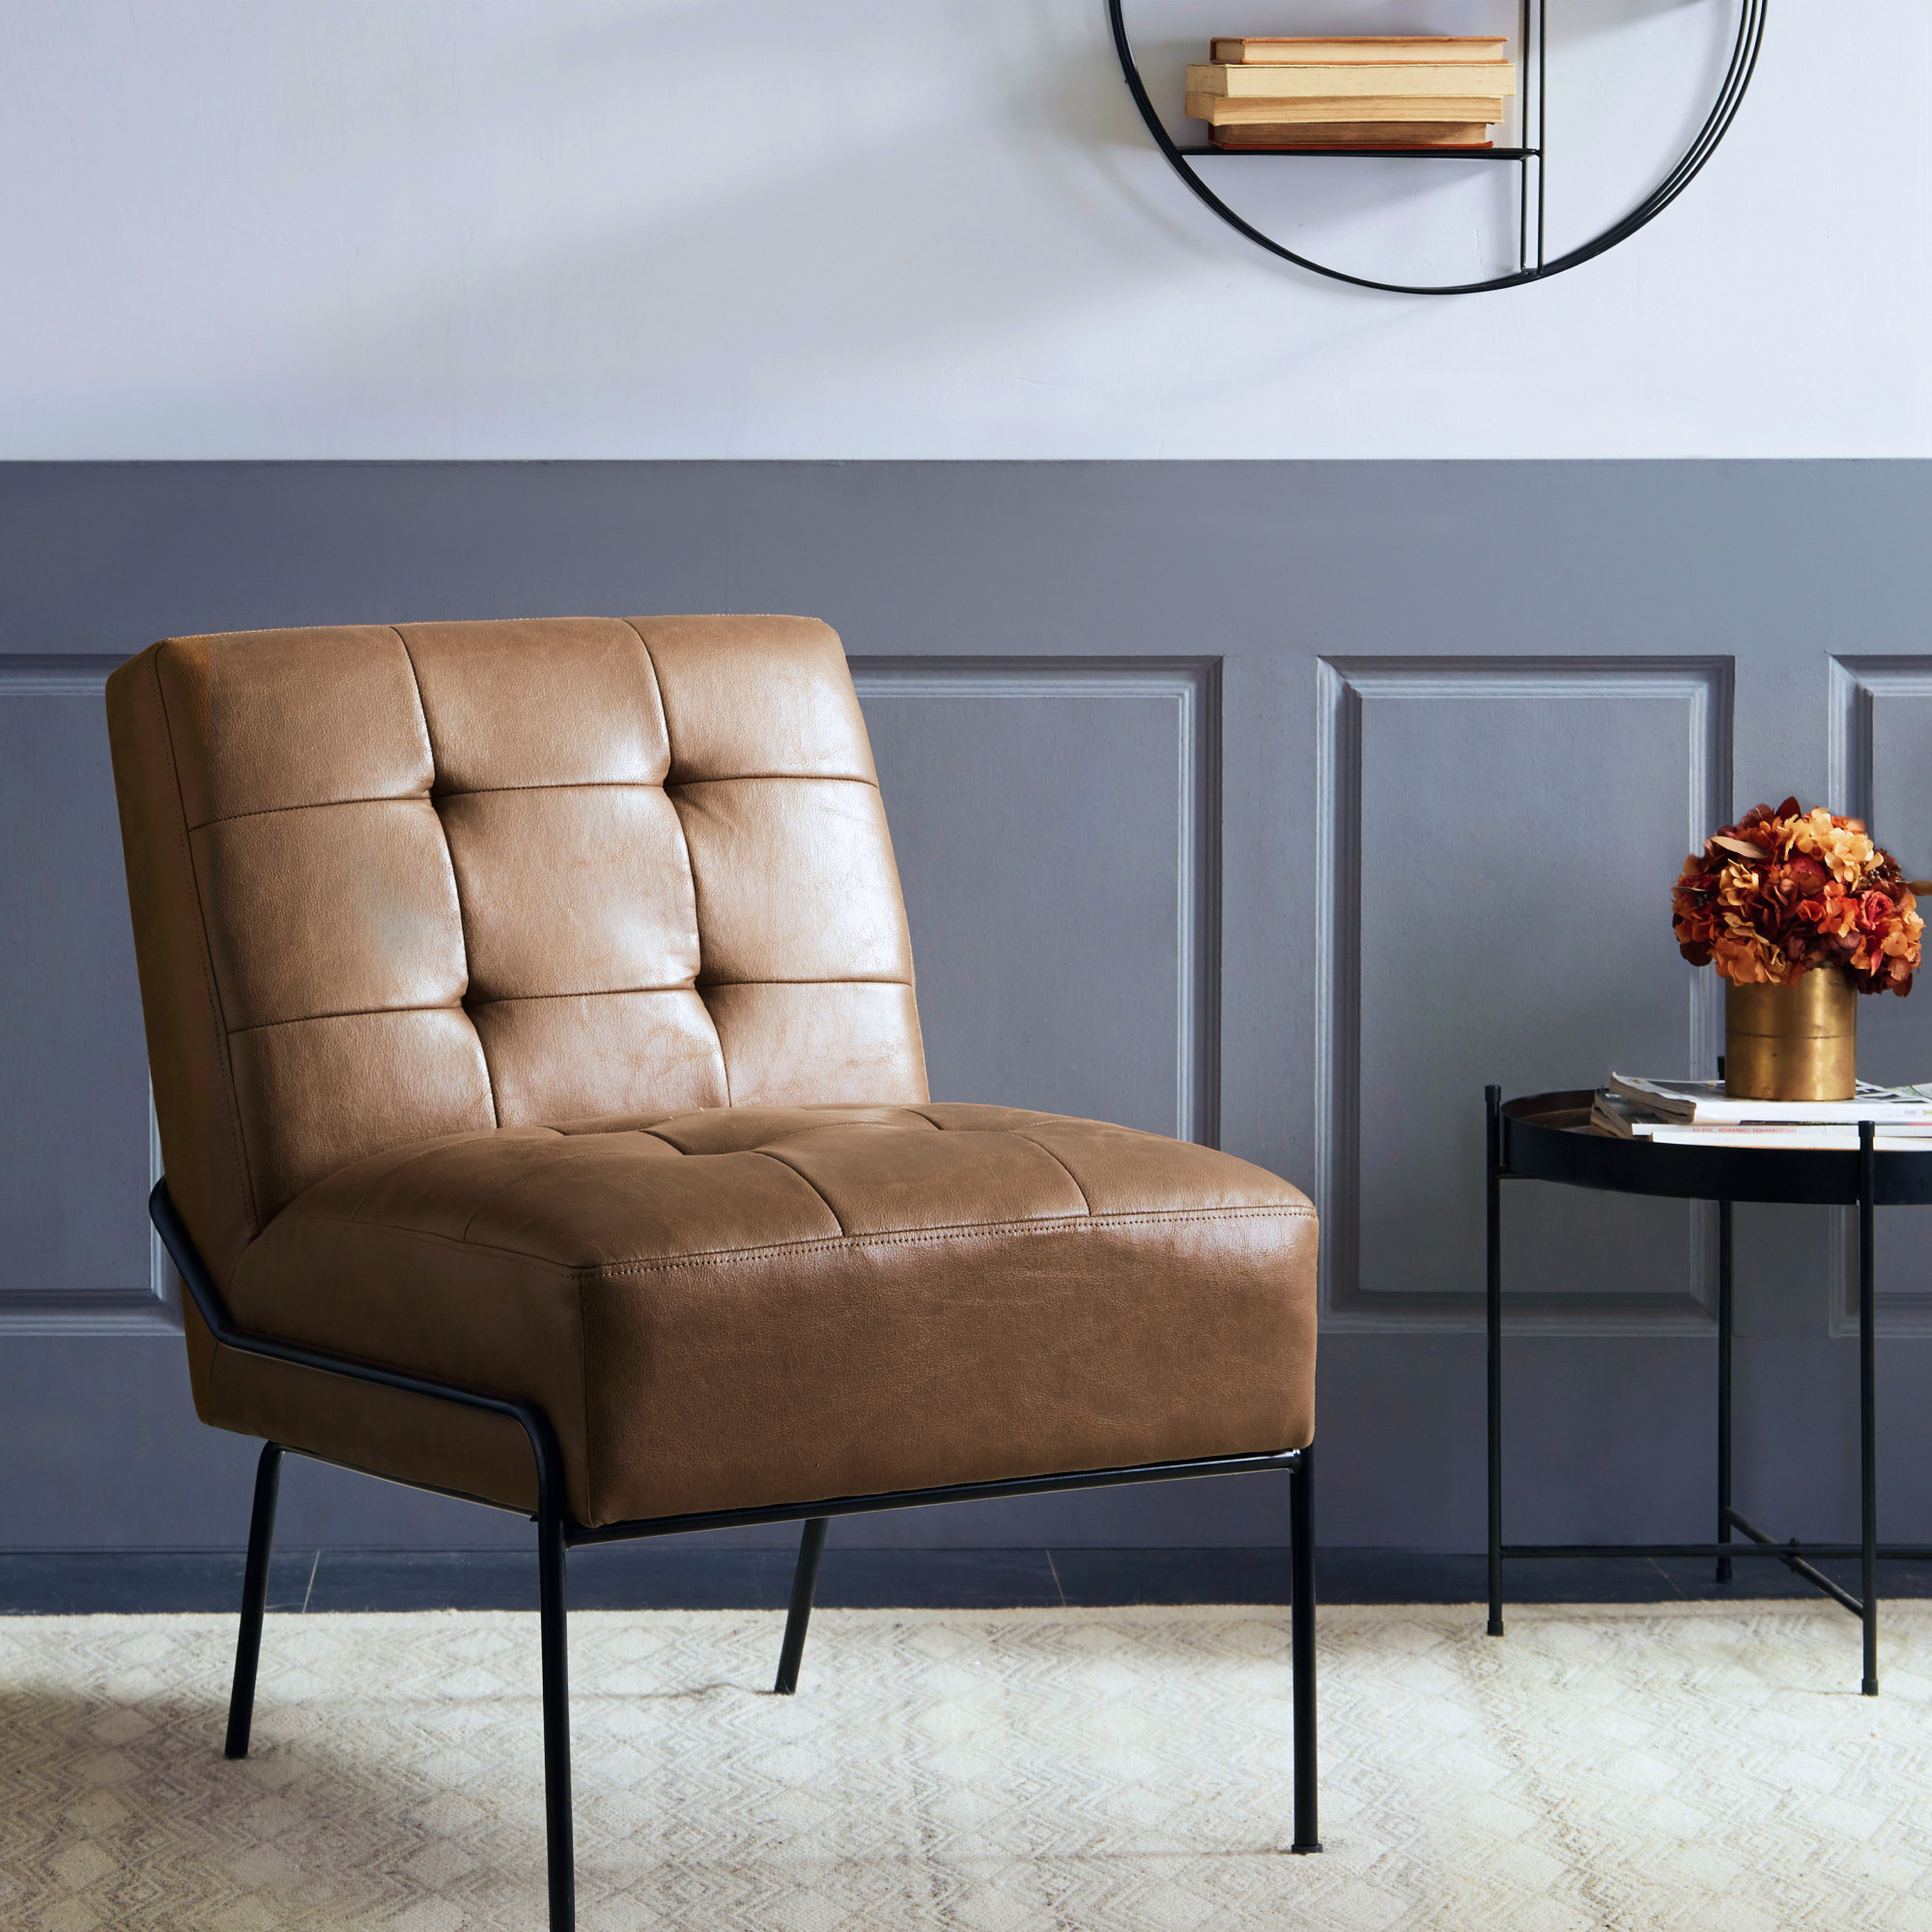 Armless Tufted Upholstered Accent Chair with Metal Legs